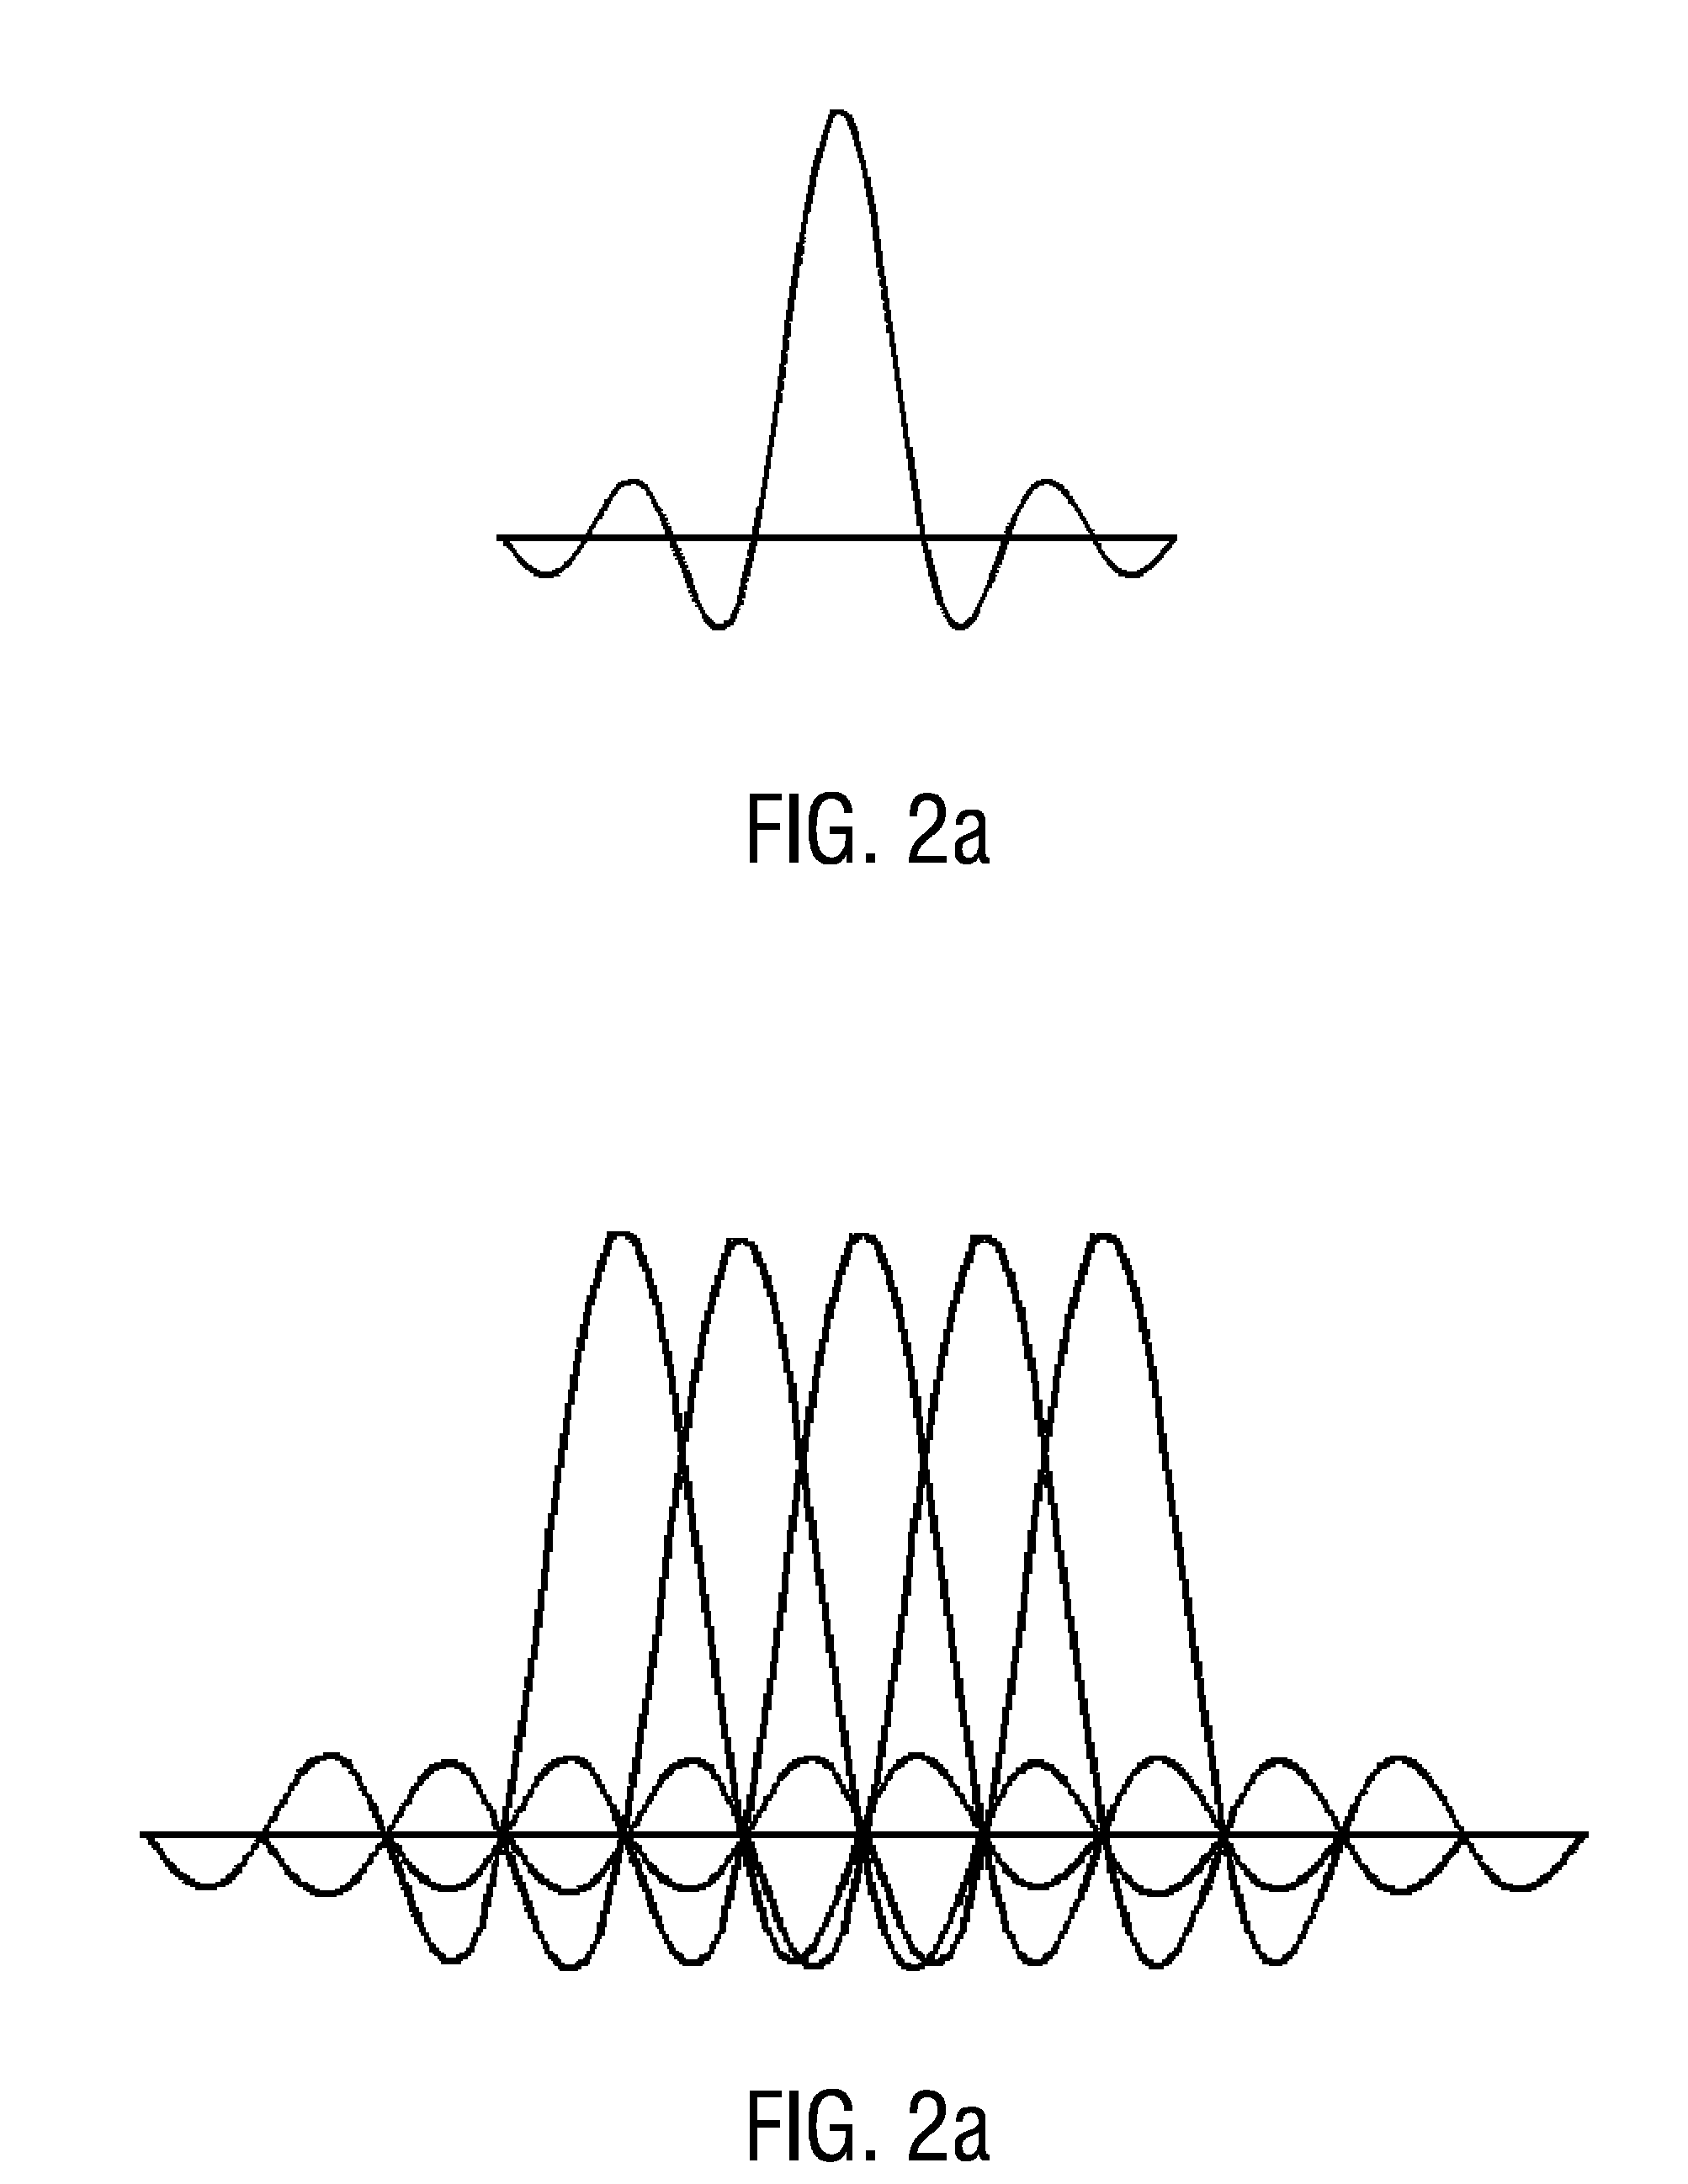 Channel estimation of multi-carrier signal with selection of time or frequency domain interpolation according to frequency offest of continuous pilot